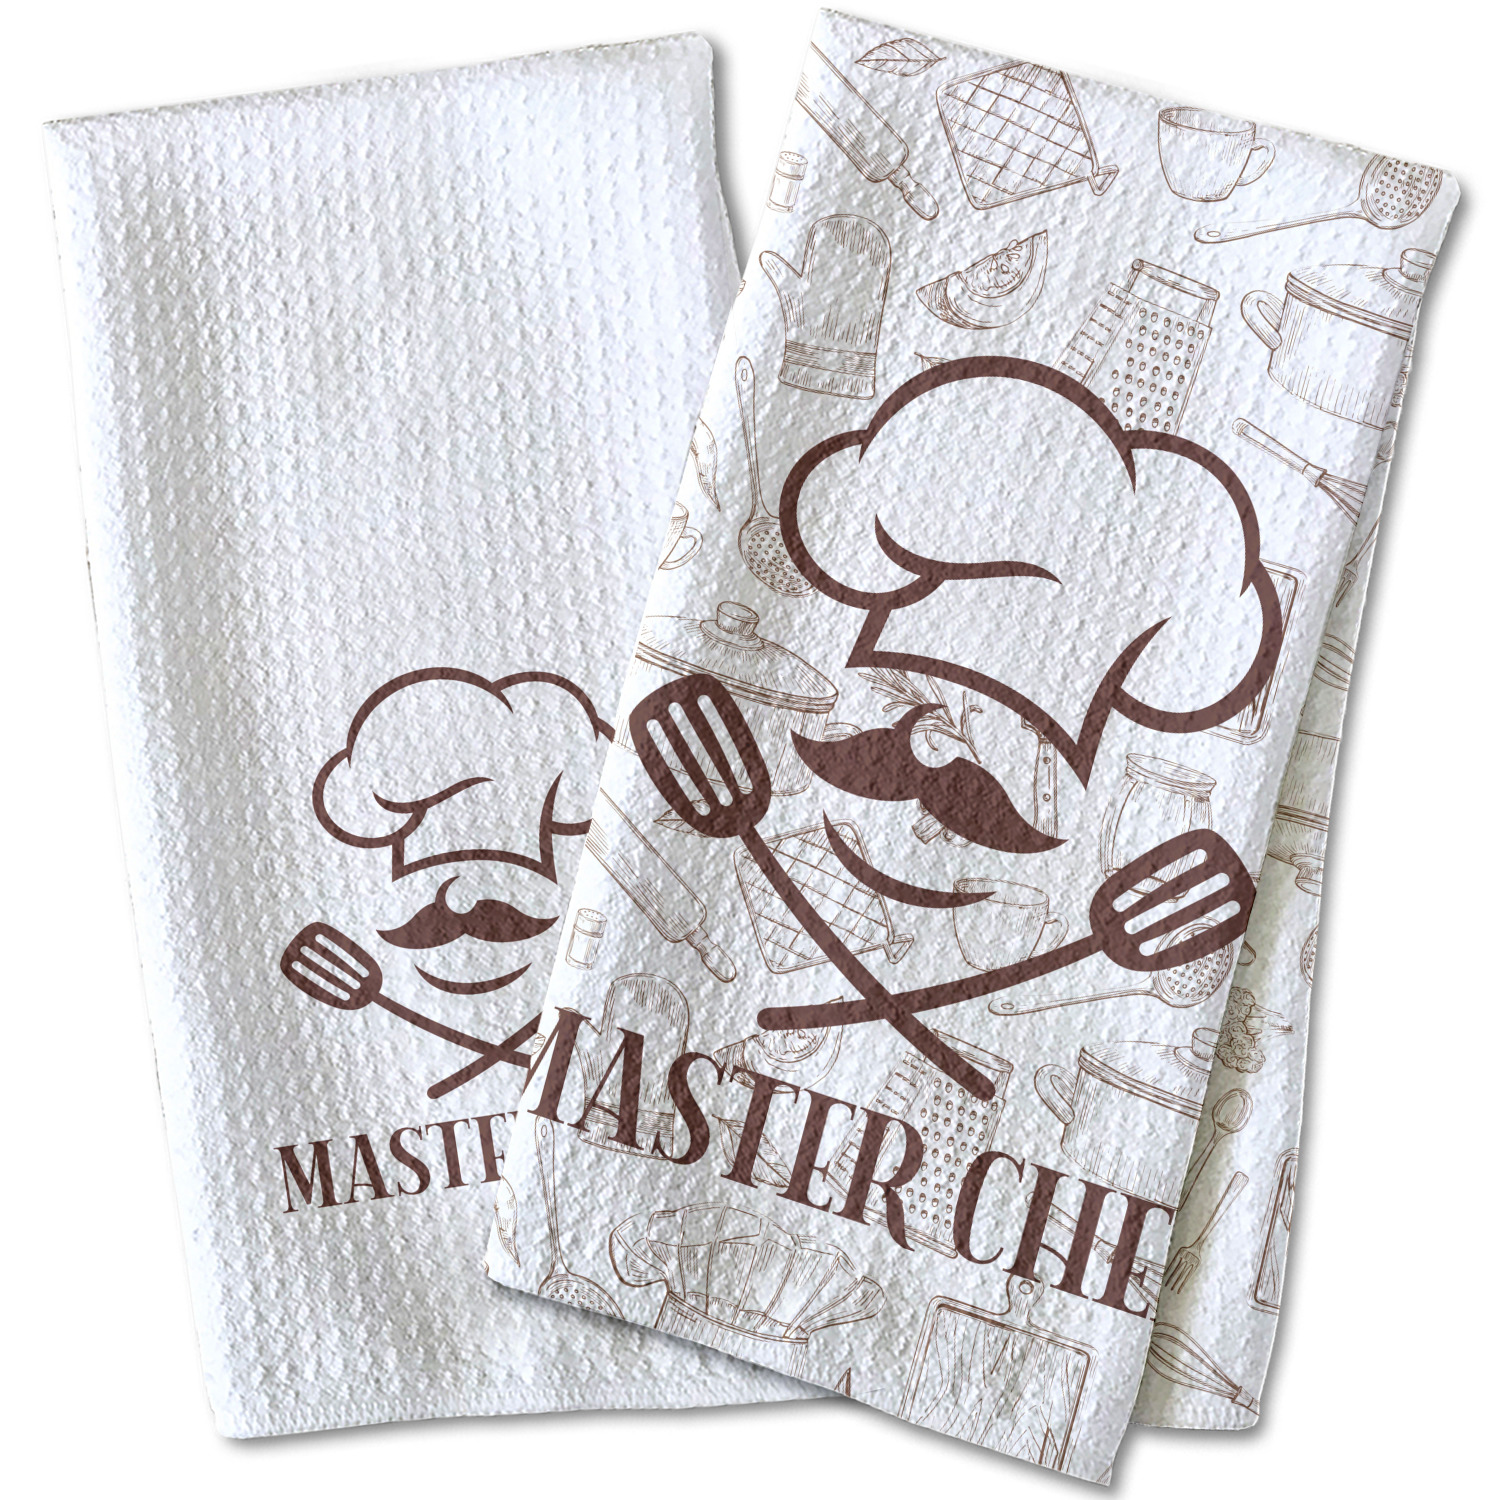 https://www.youcustomizeit.com/common/MAKE/4519519/Master-Chef-Waffle-Weave-Towels-Parent-Main-2nd-version.jpg?lm=1697659152